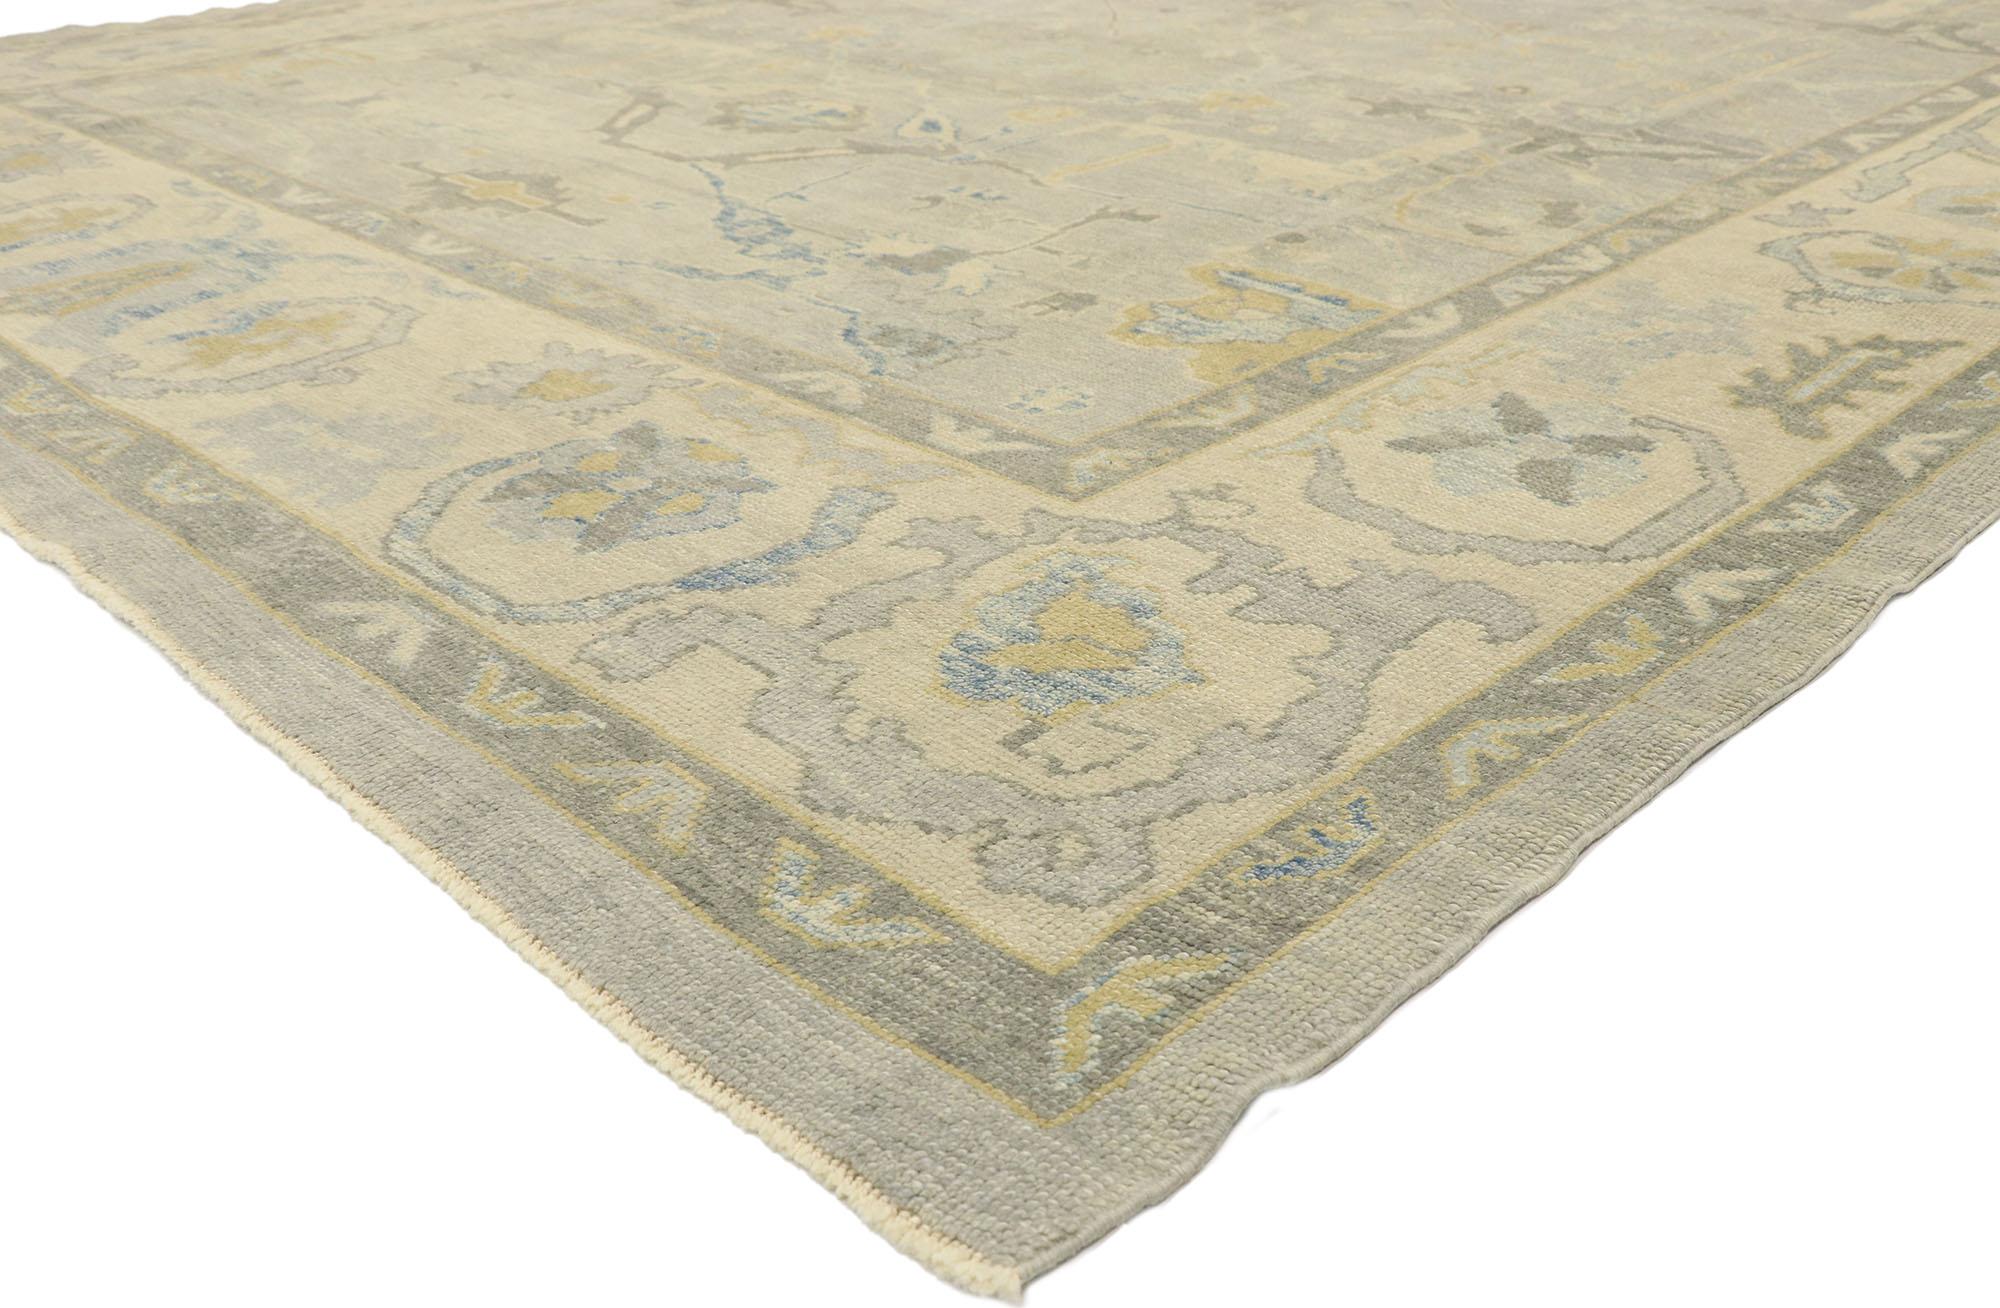 52874 new contemporary Turkish Oushak rug with Modern Transitional style. Blending elements from the modern world with gracious gray hues, this hand knotted wool contemporary Turkish Oushak rug will boost the coziness factor in nearly any space. It